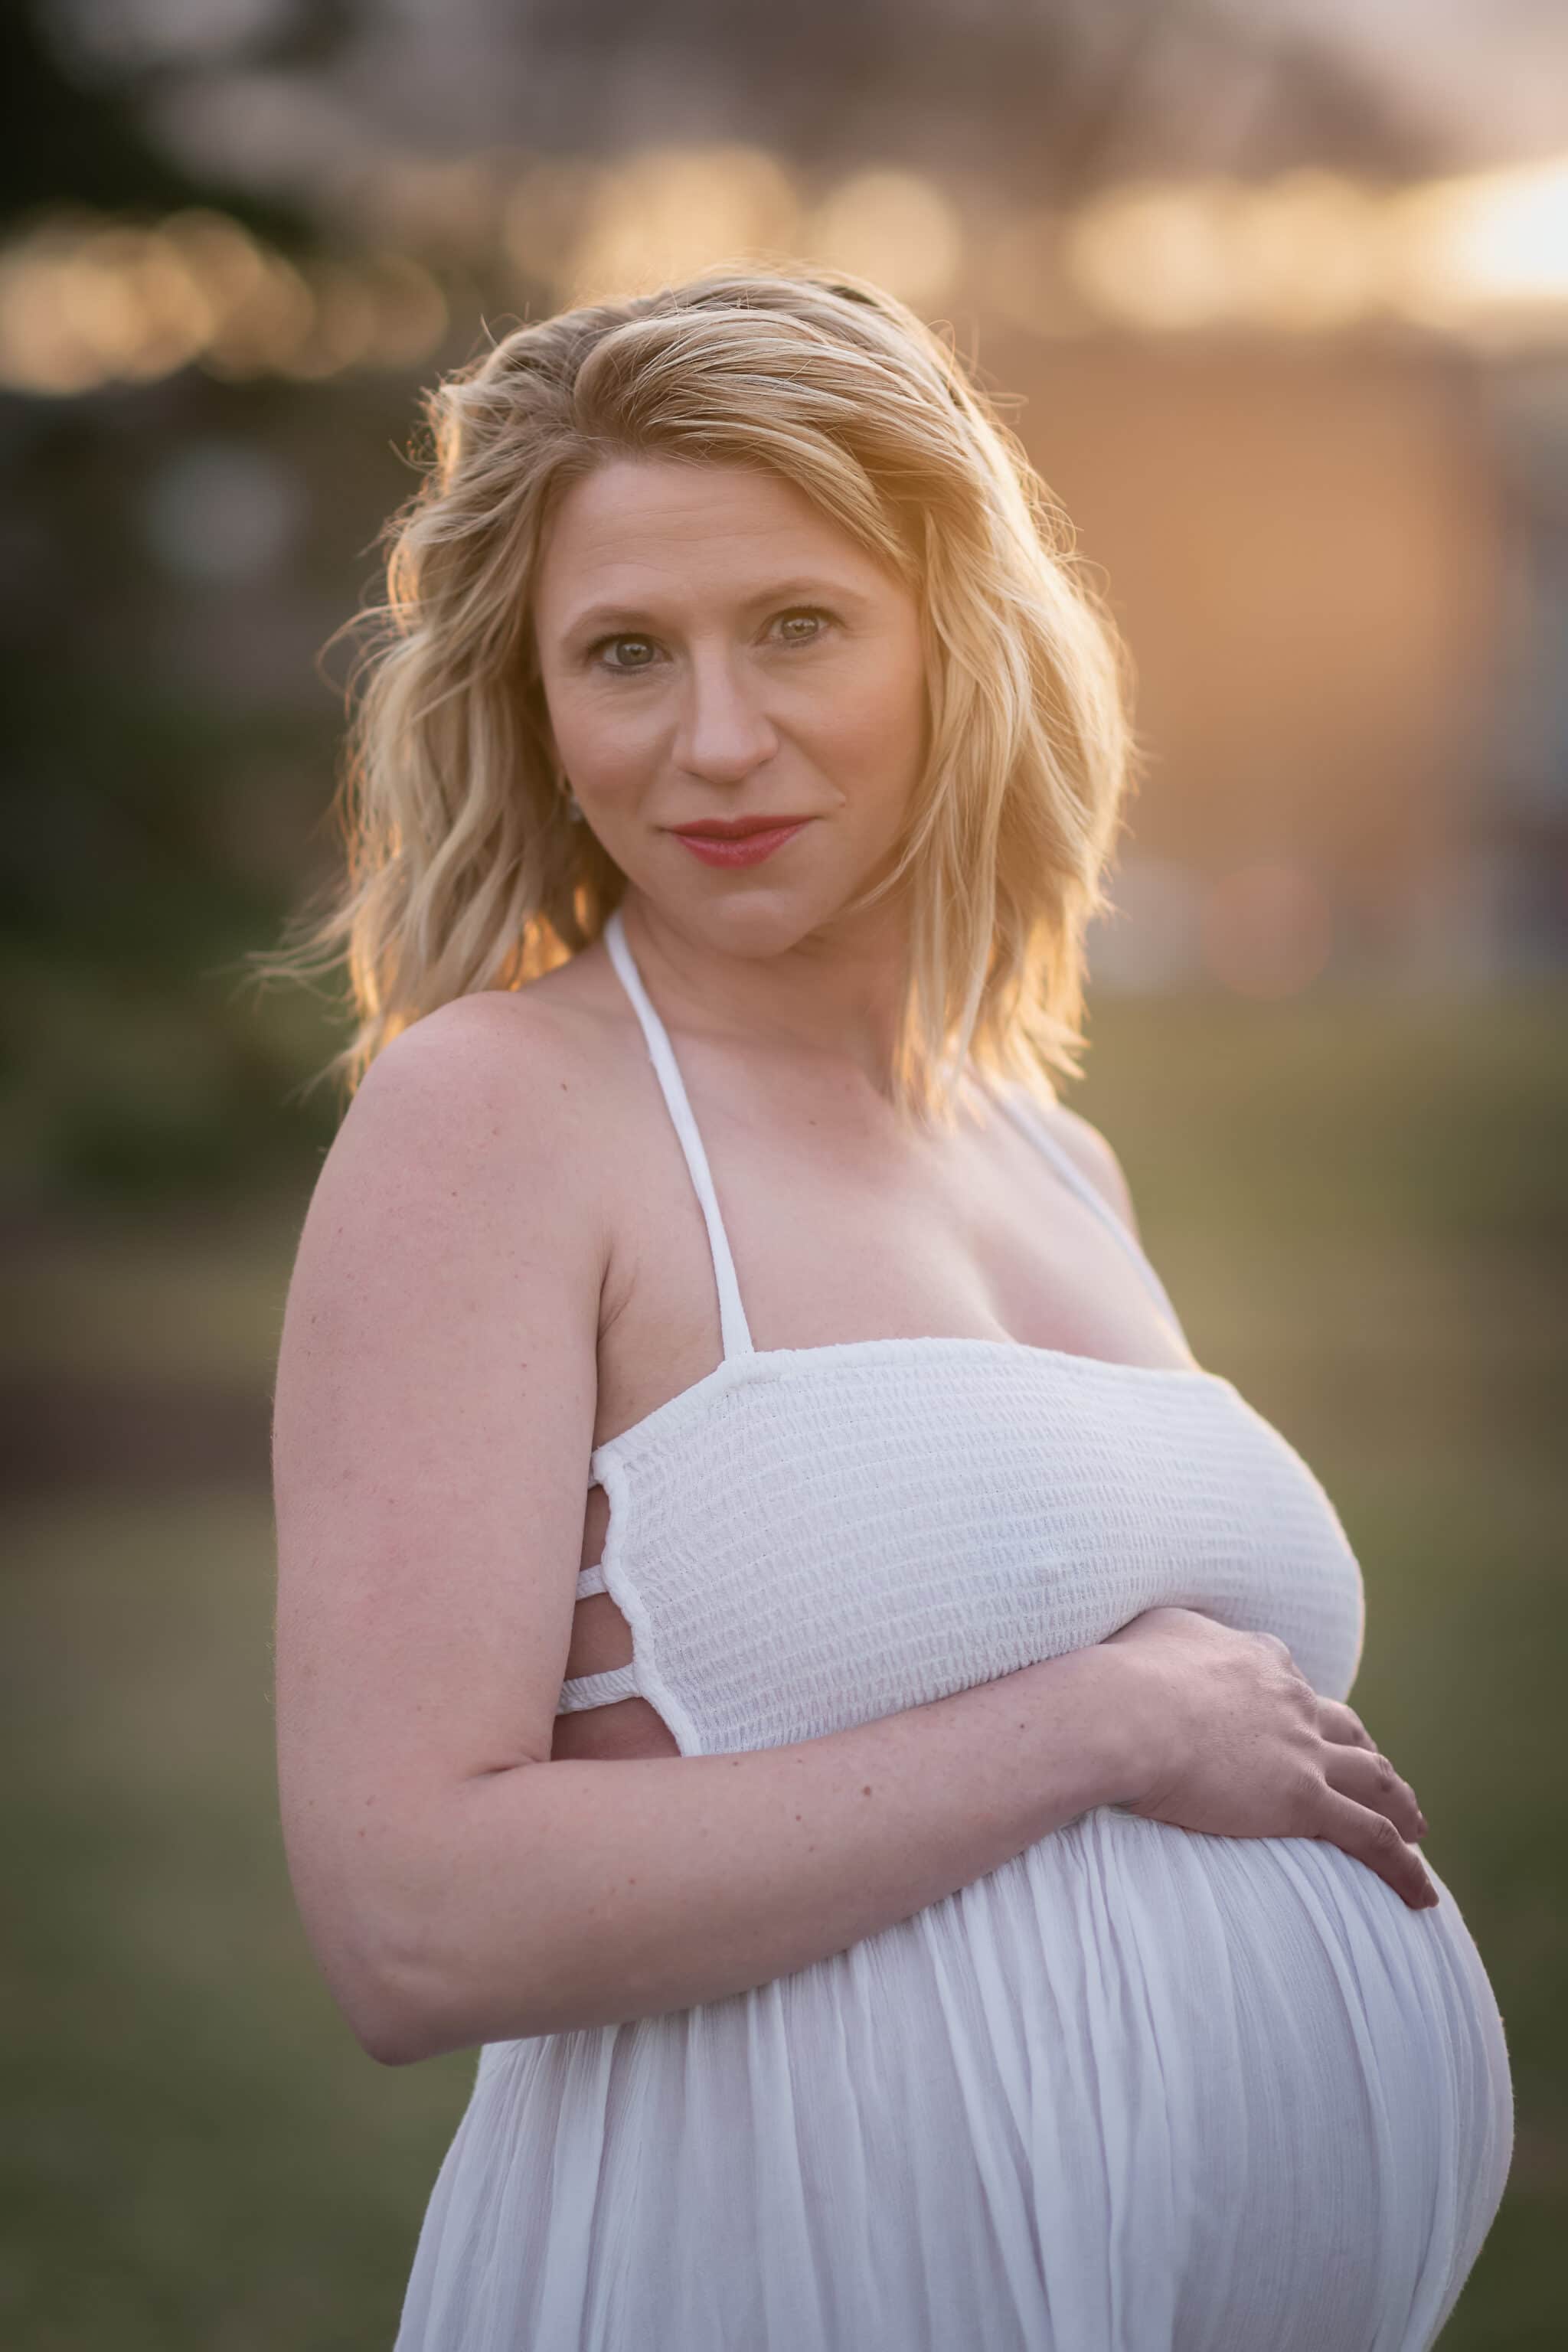 An expectant mother lit with the light of the setting sun during a Denver maternity session.